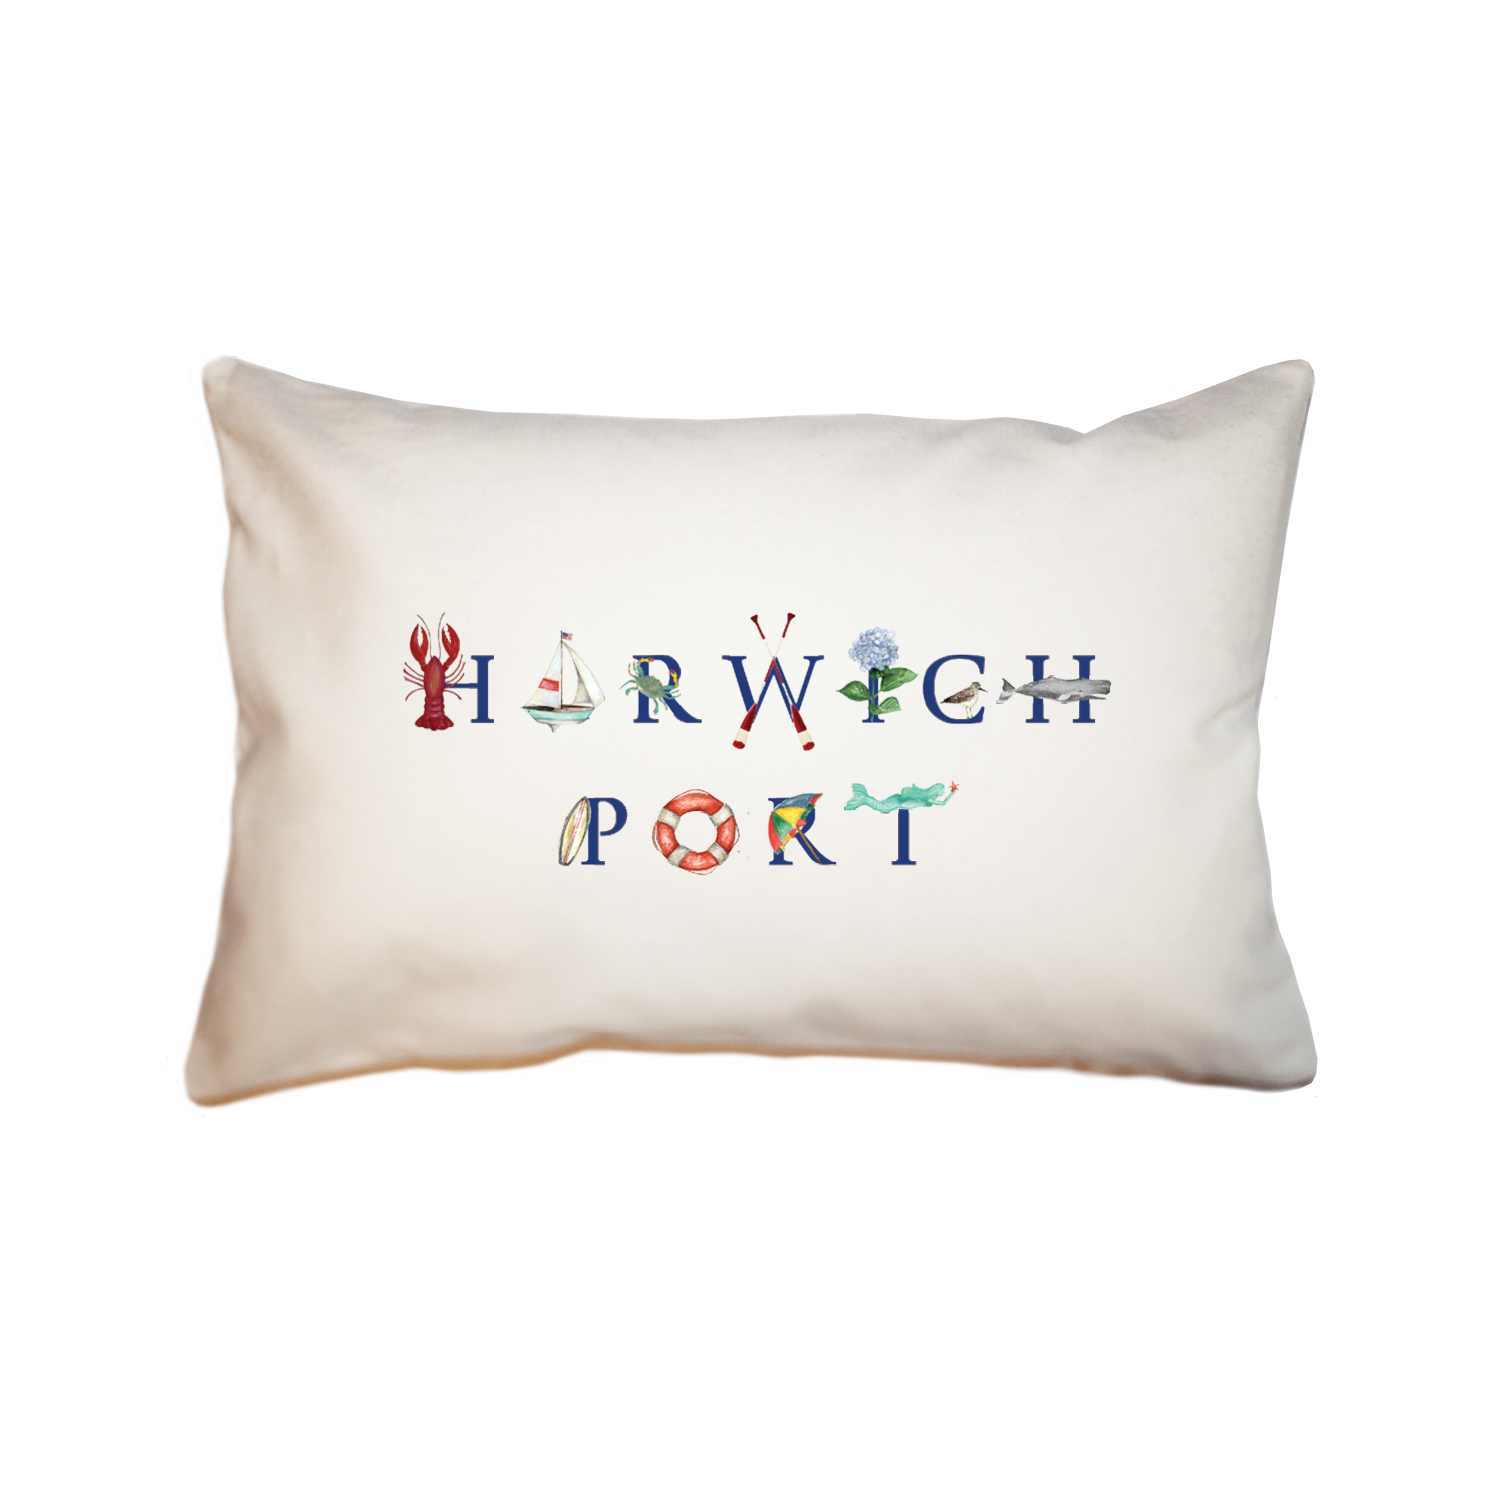 harwich port large rectangle pillow